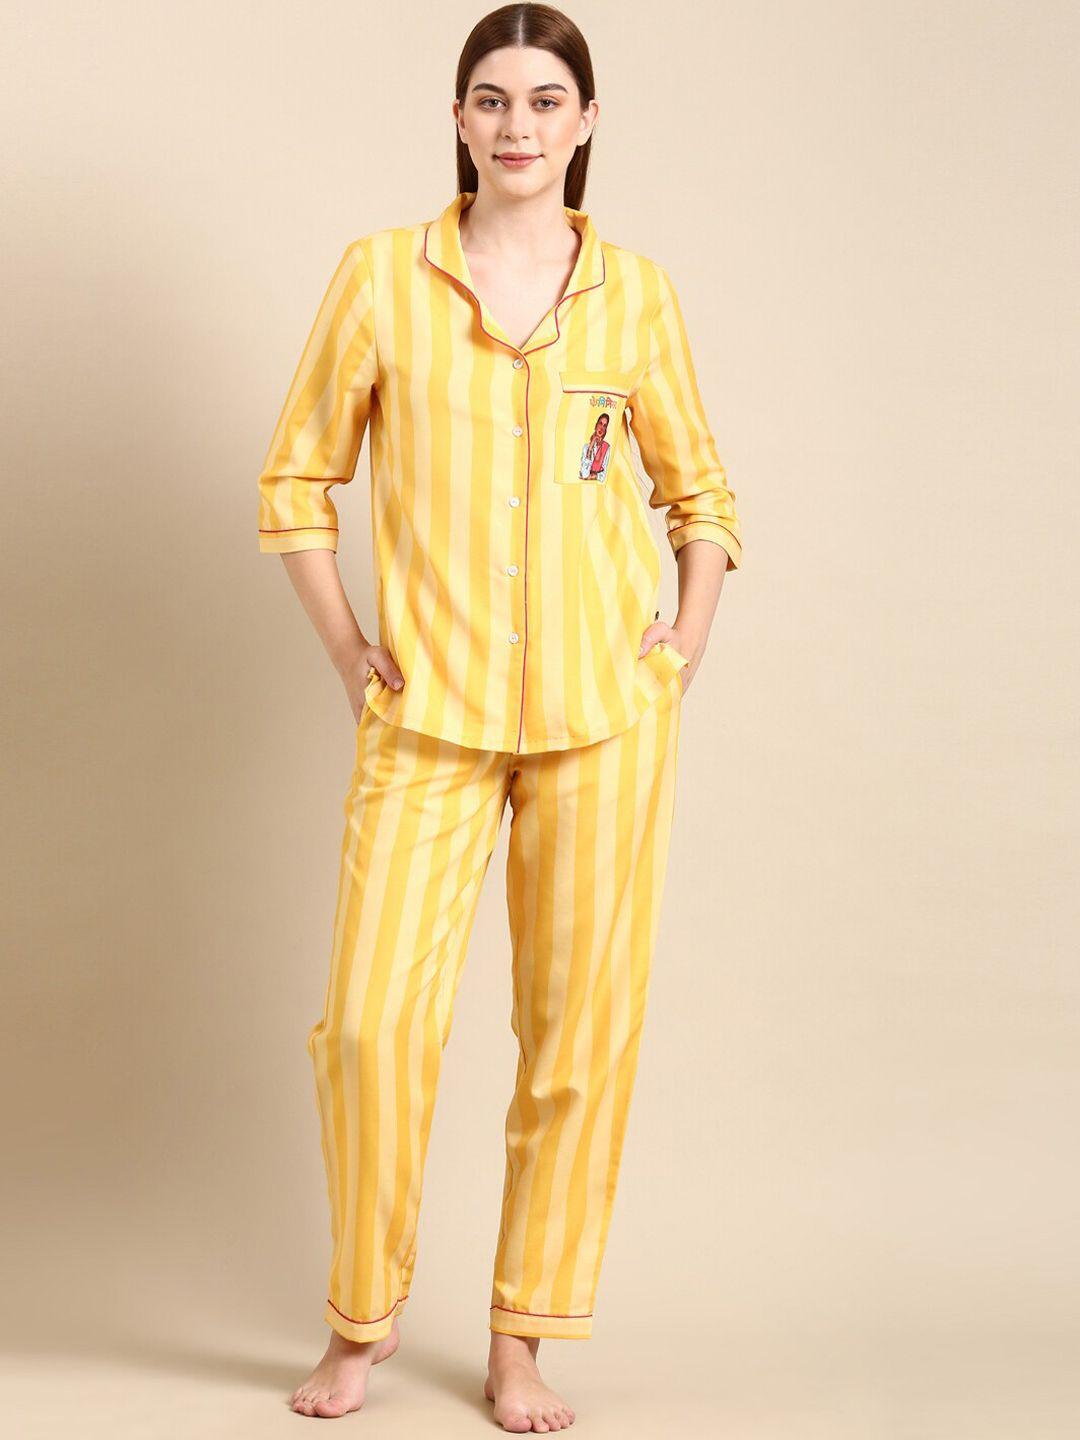 bannos-swagger-yellow-&-red-striped-night-suit